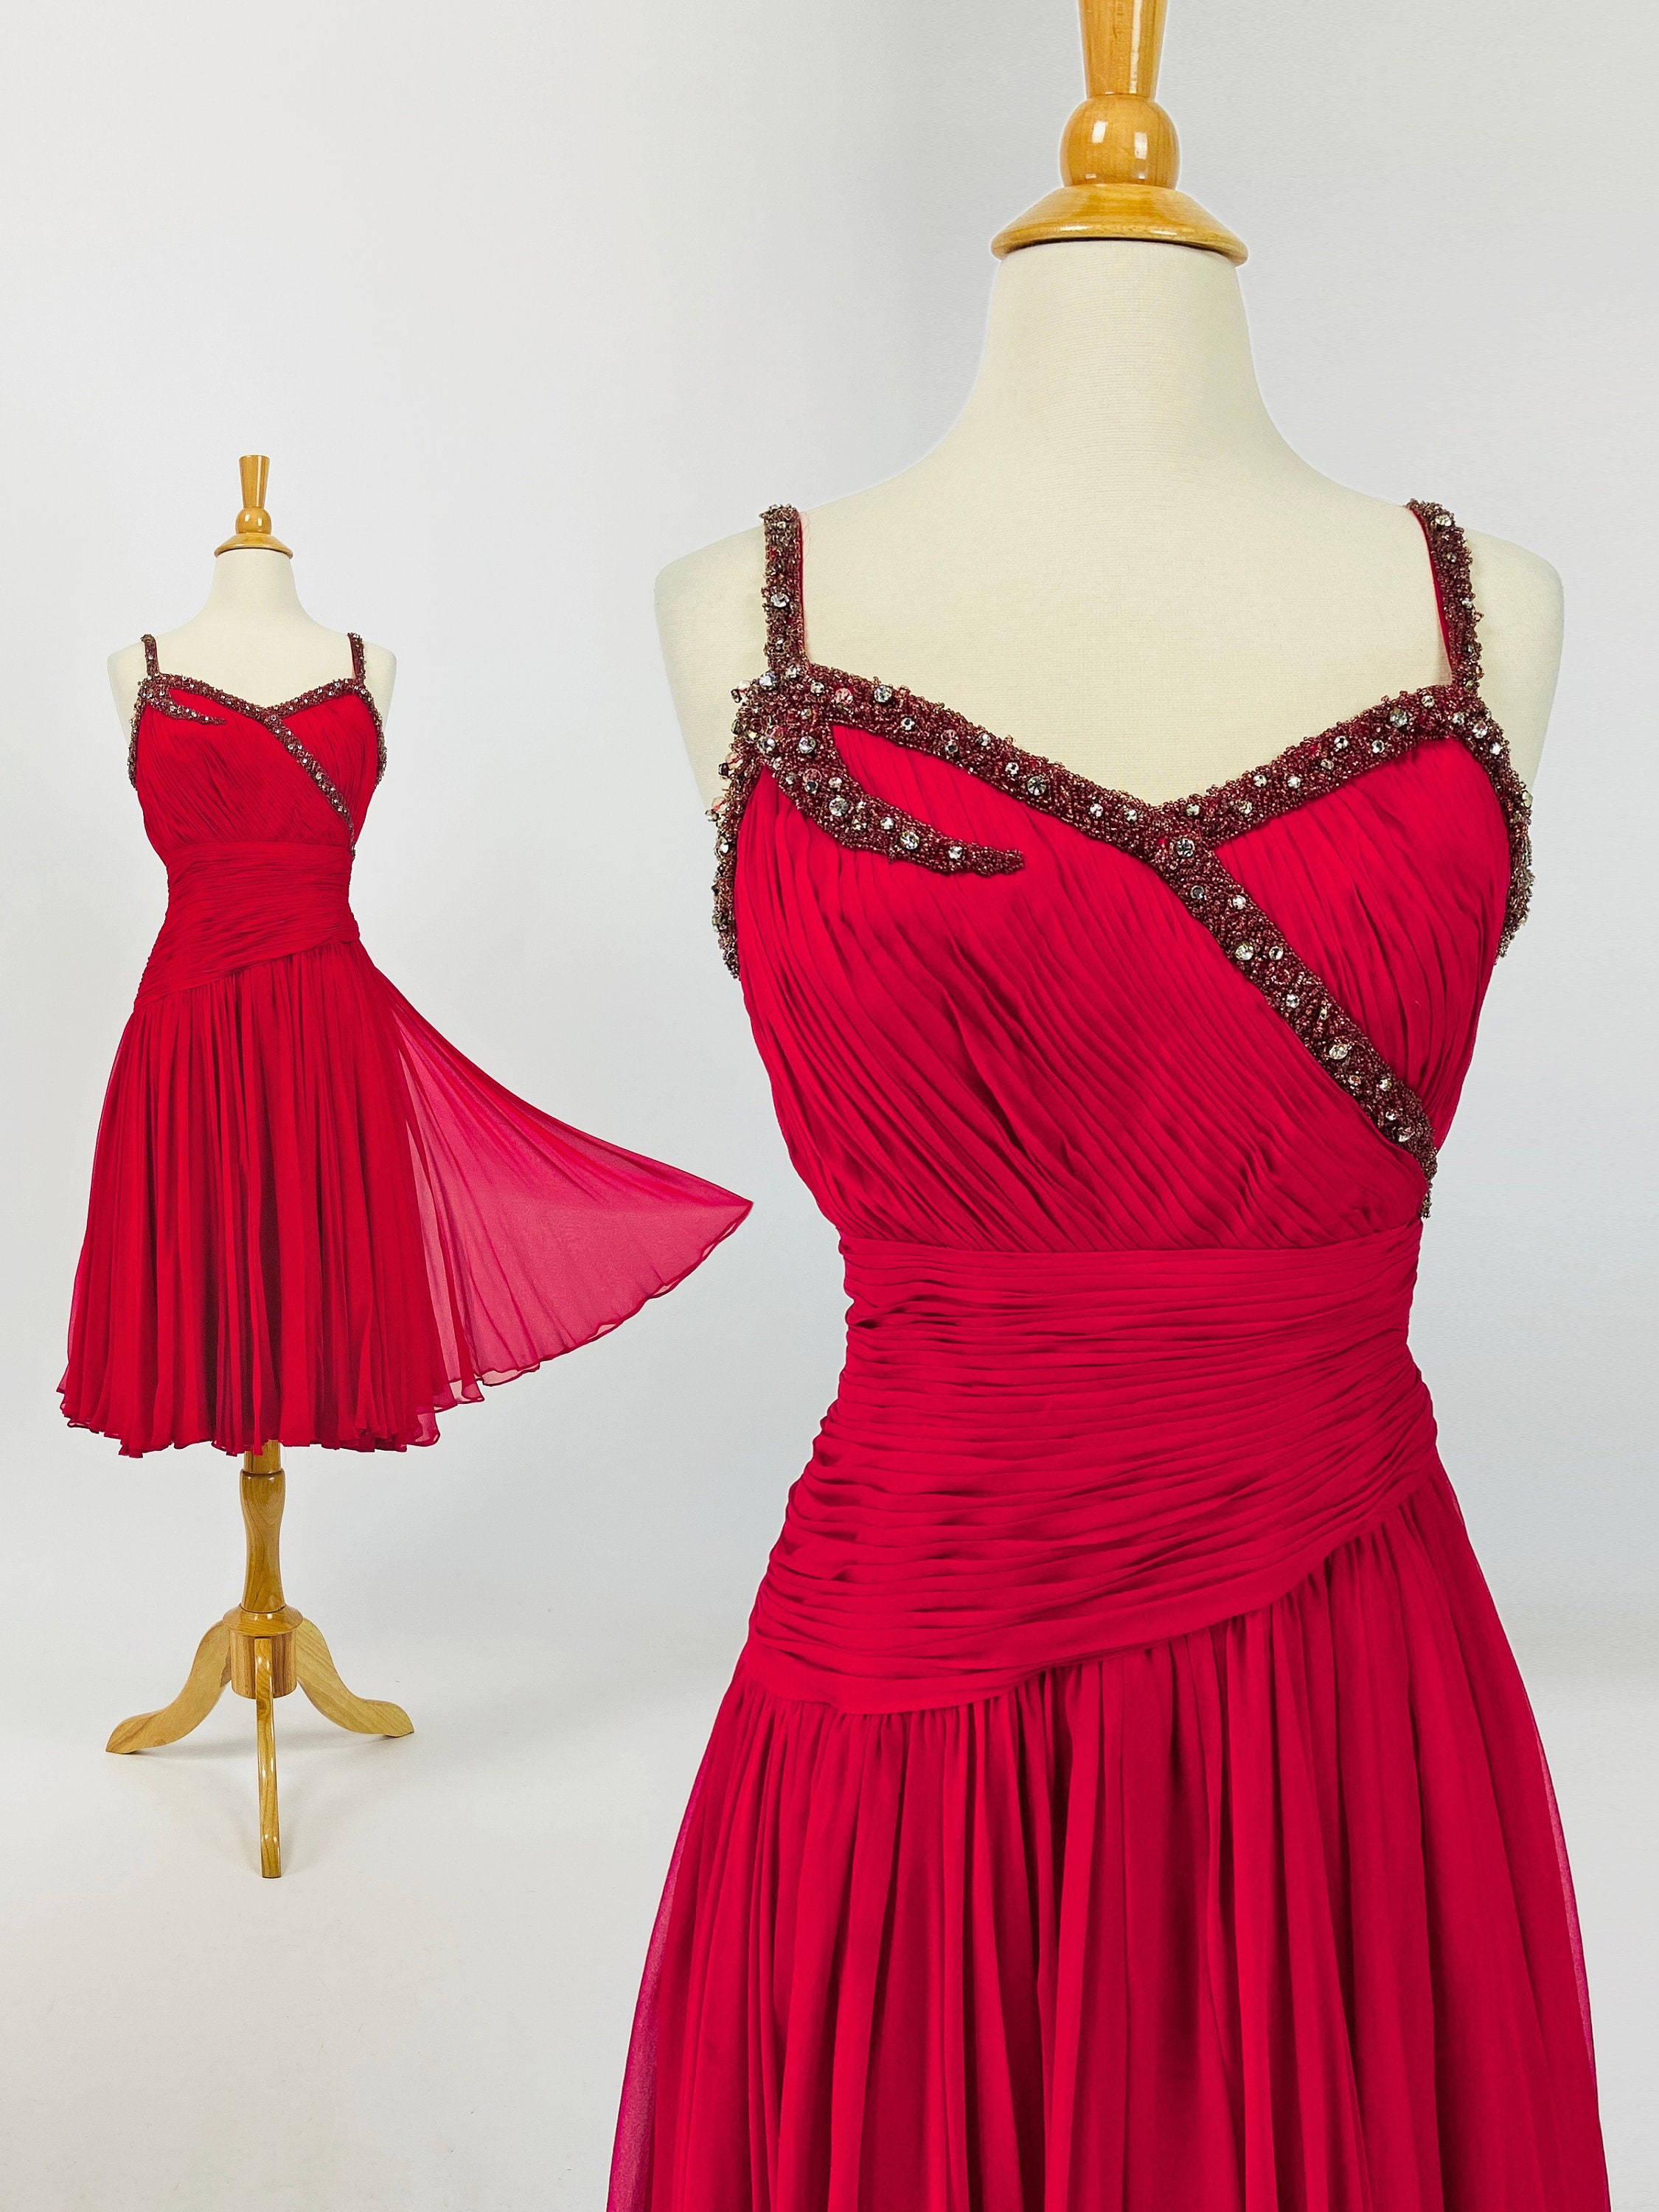 Vintage 50S Pleated Chiffon Cocktail Dress, Pinup 60S Bombshell Prom Ruby Red Xs Size 0 2 Us, 4 6 Uk